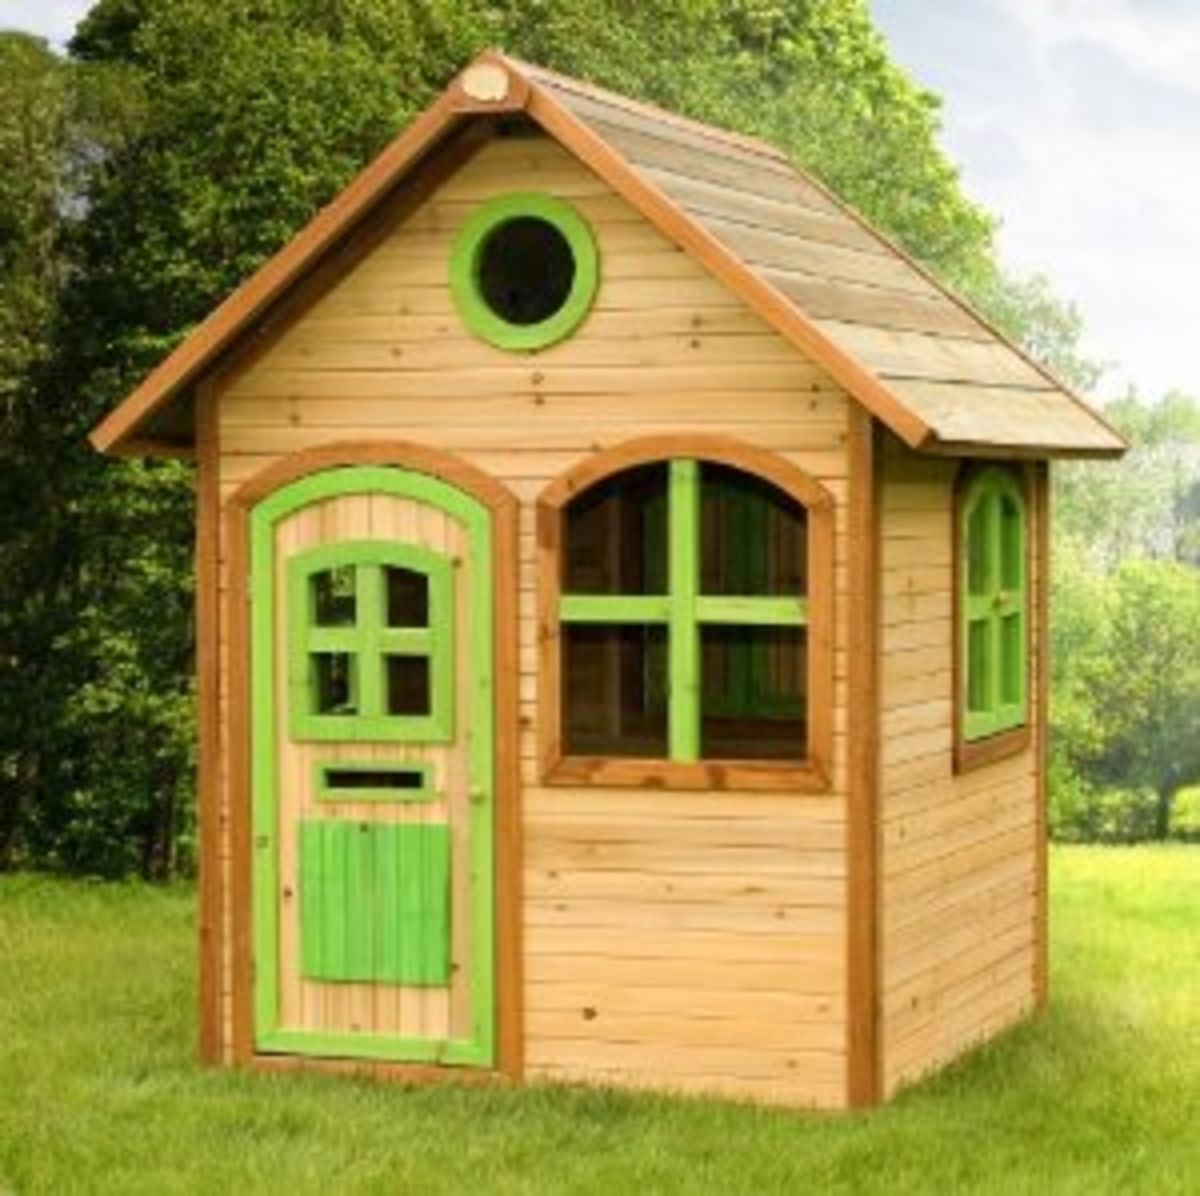 Best-Rated Children's Wooden Outdoor Playhouses For Sale ...